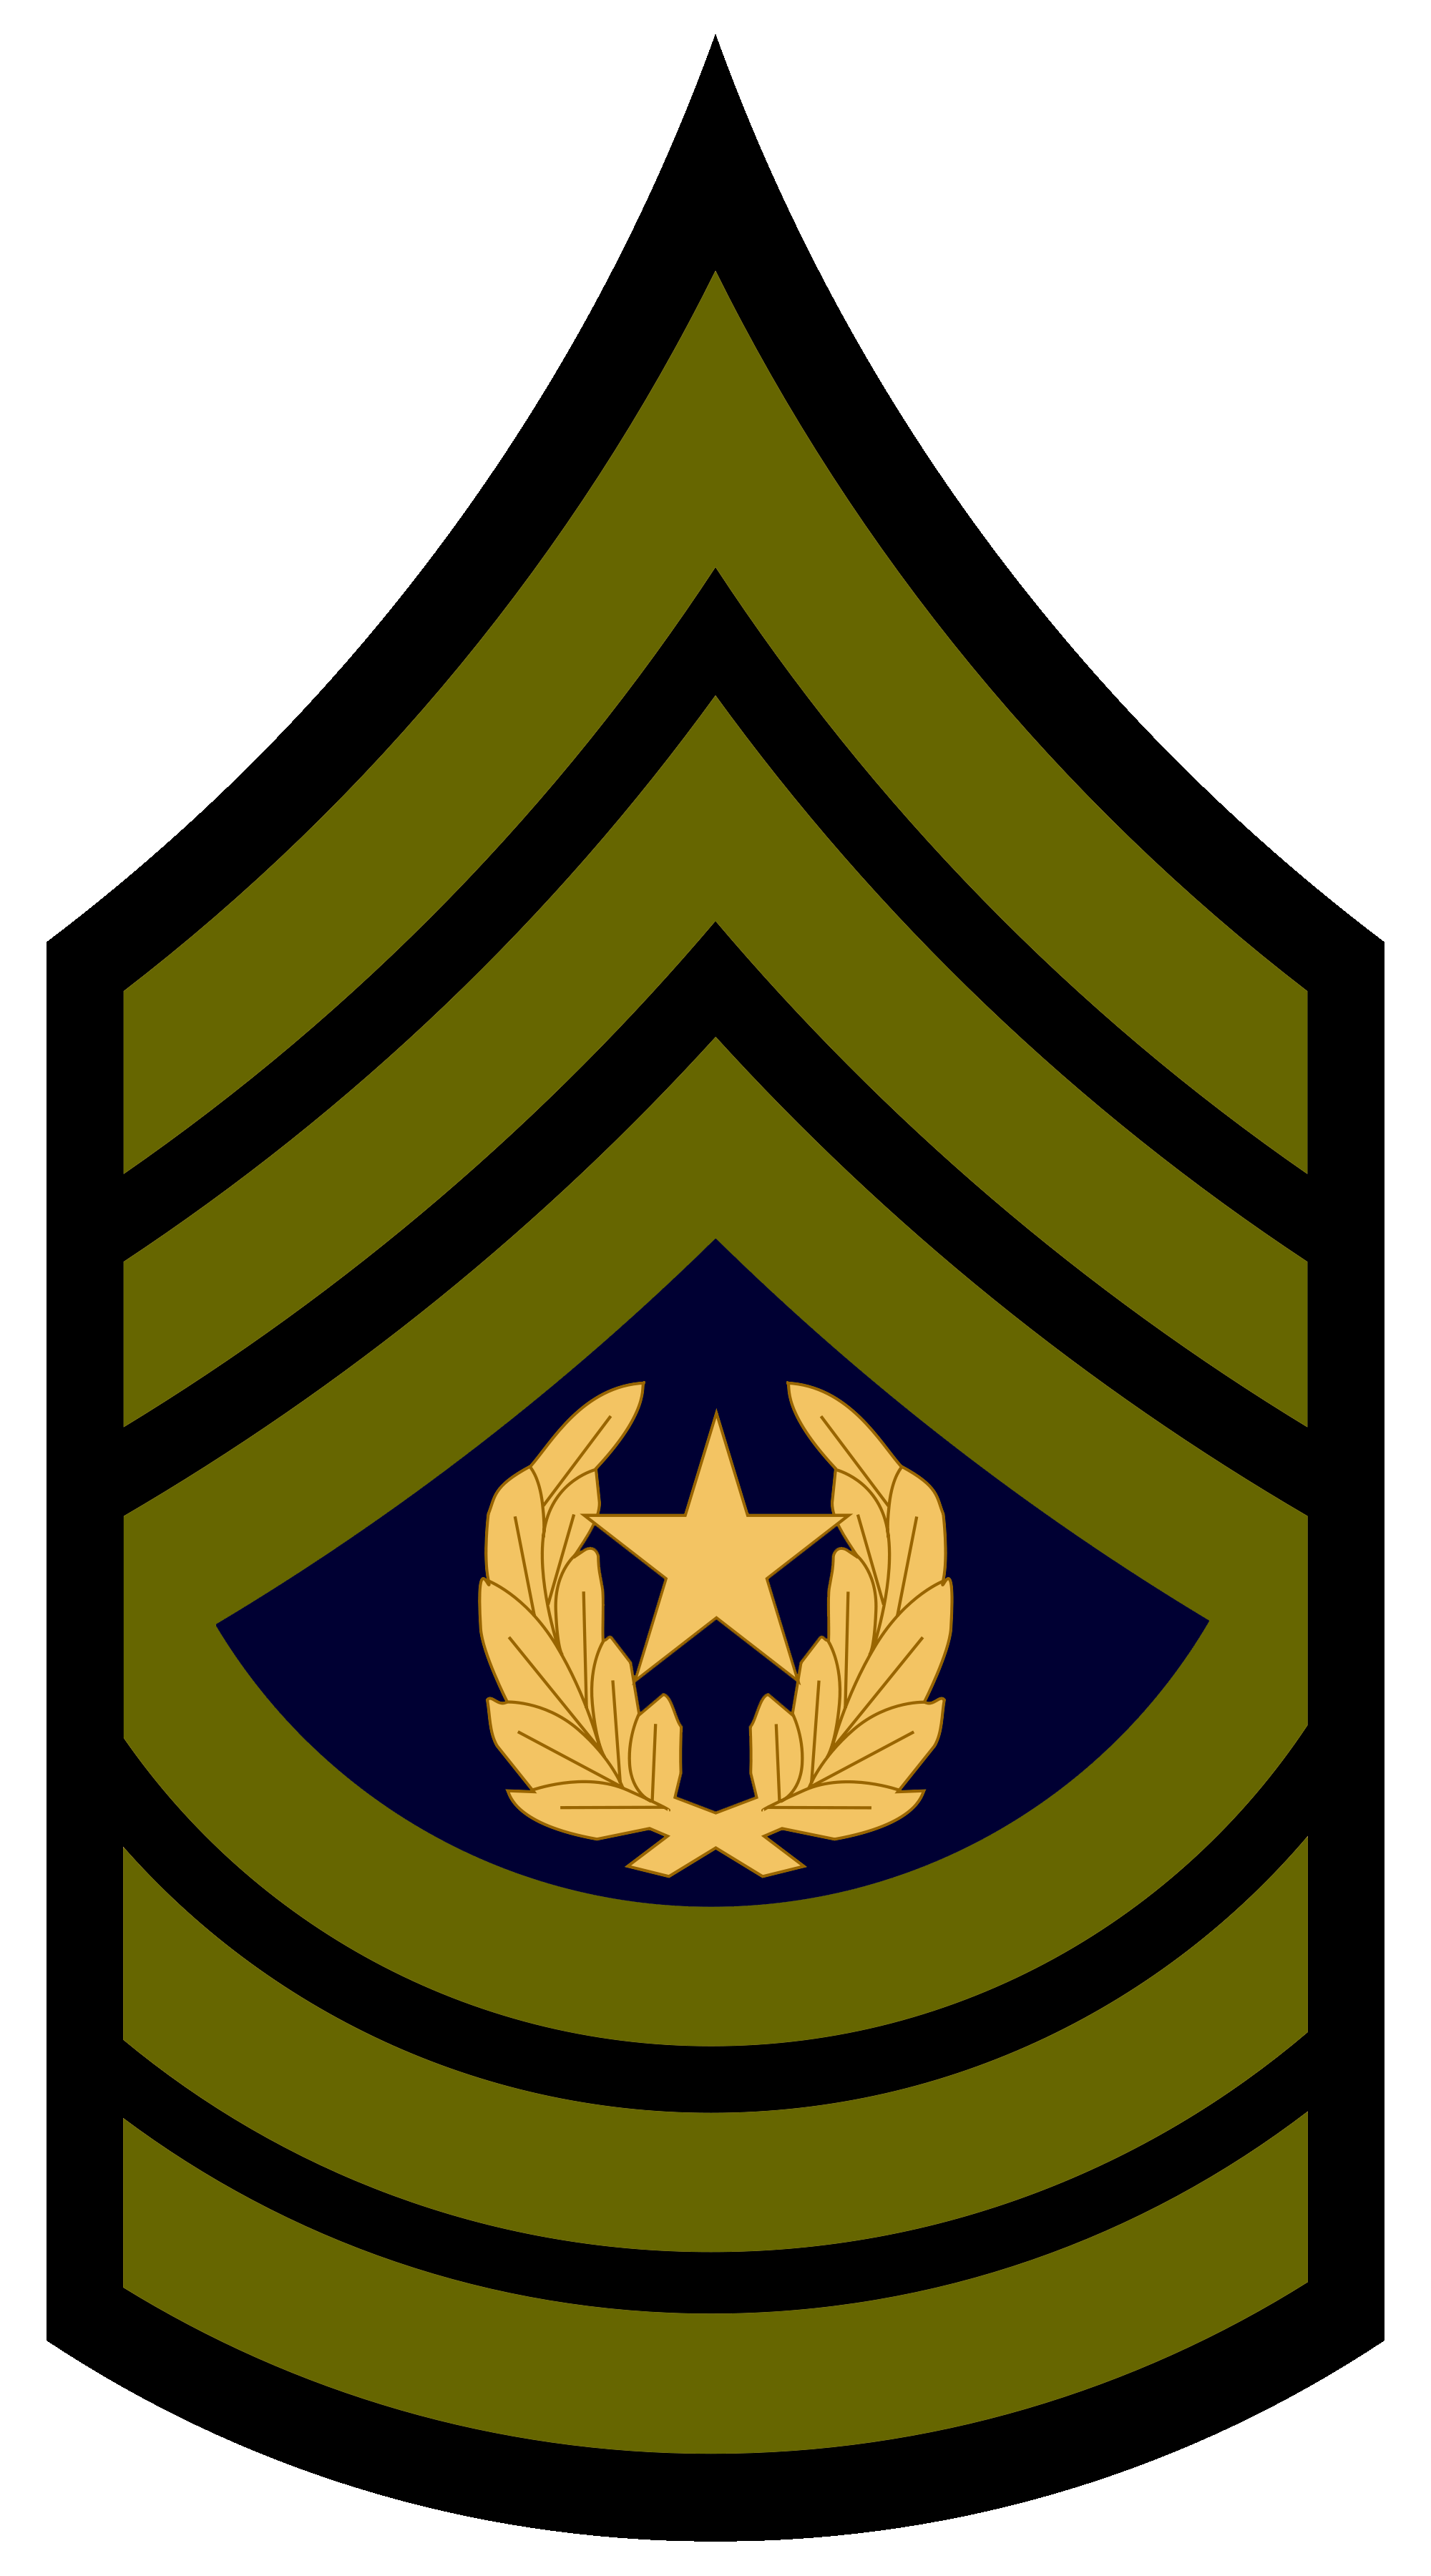 Army Csm Rank Png Transparent Army Csm Rankpng Images Pluspng